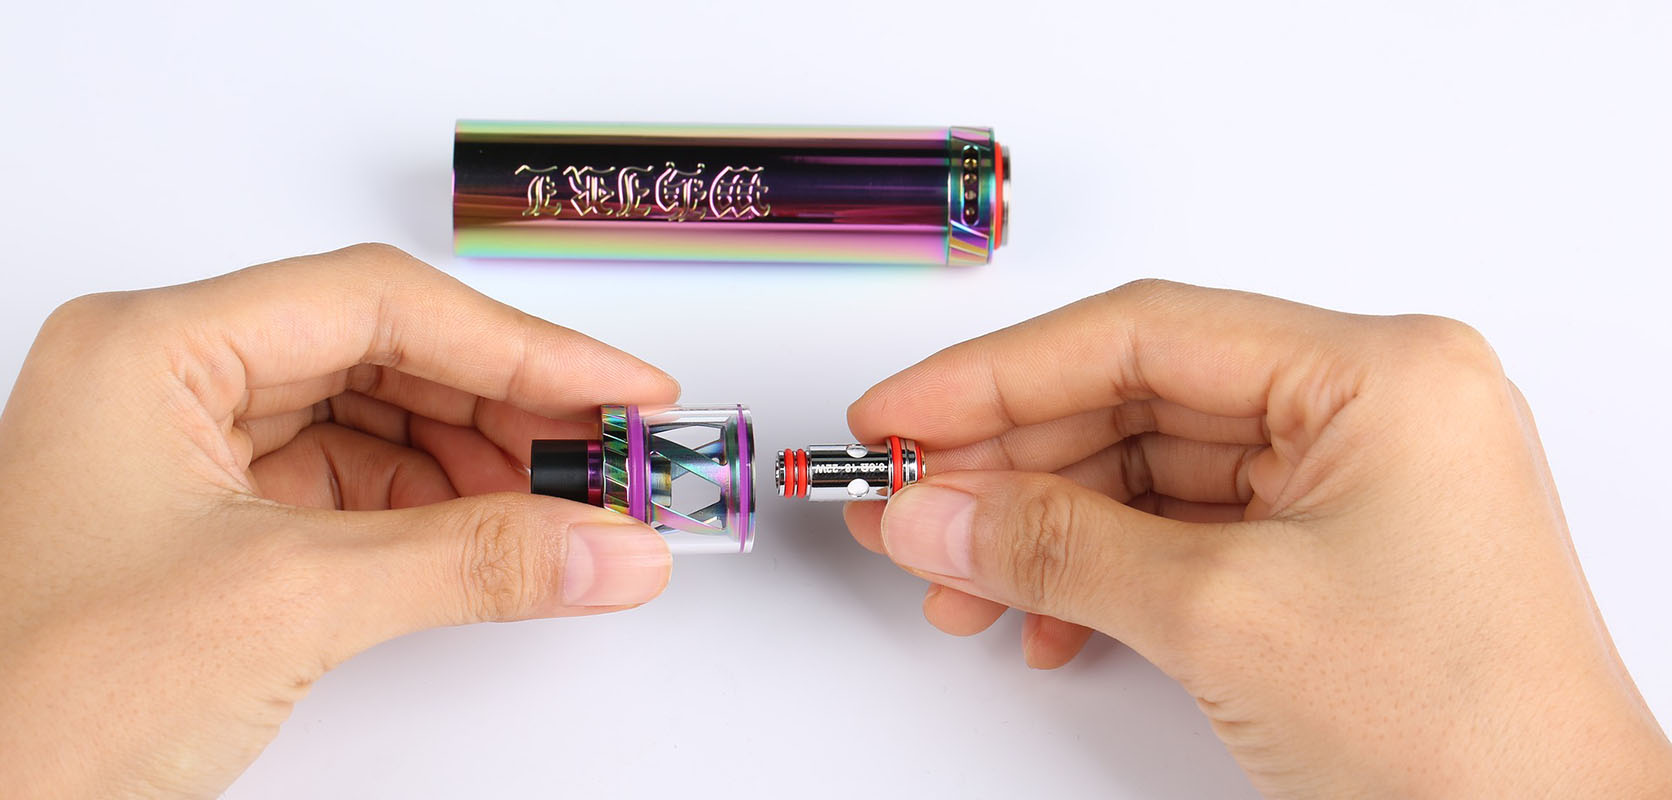 refillable vape carts. weed shop online. buy weed vapes canada. buy vapes online canada